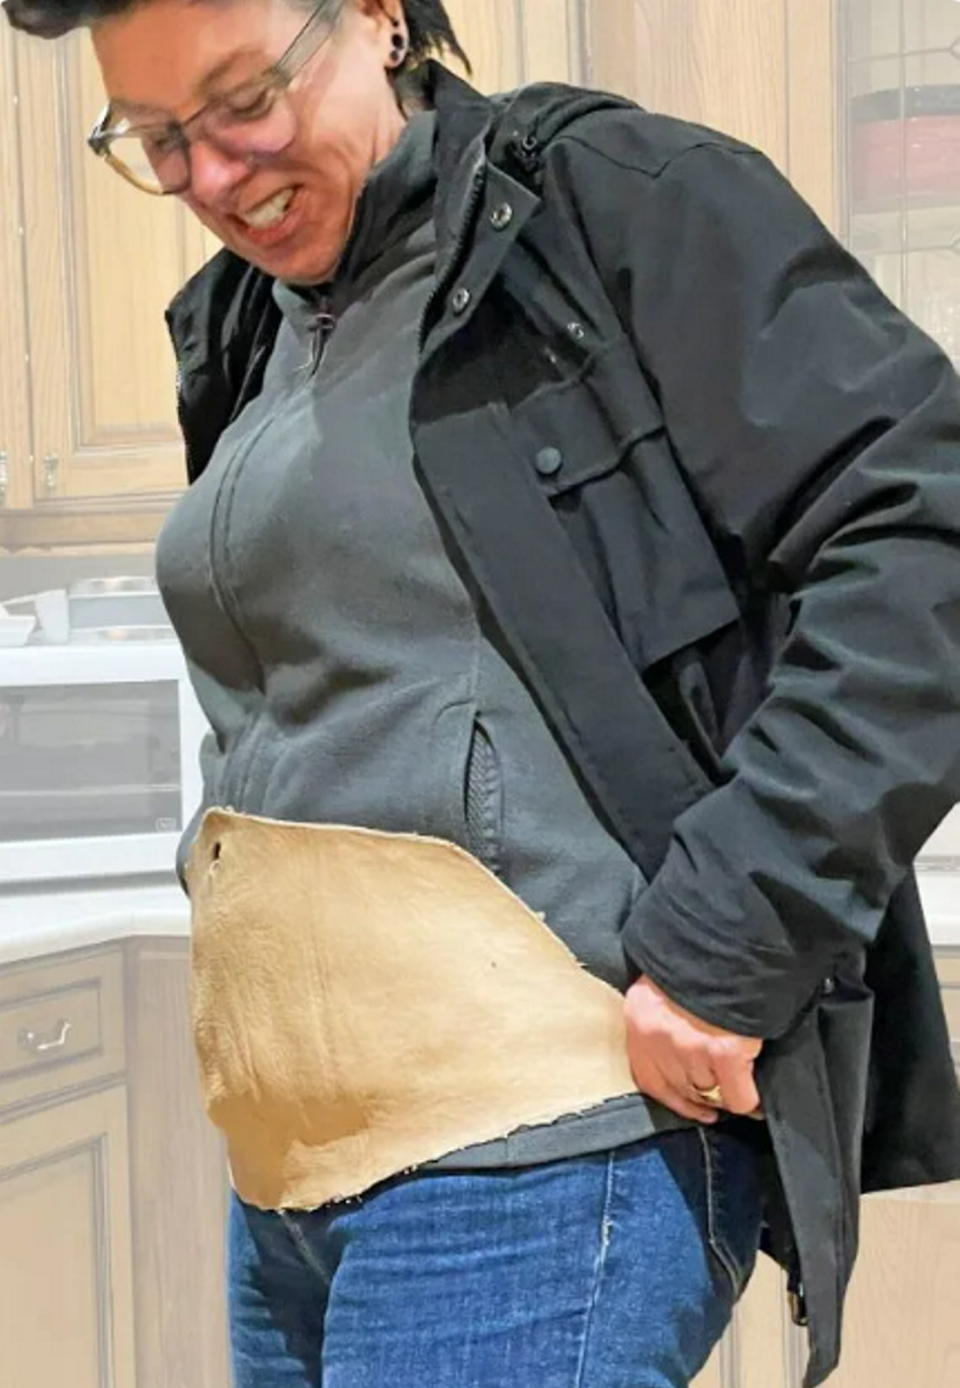 Katie with the removed skin after her weight loss surgery. (SWNS)